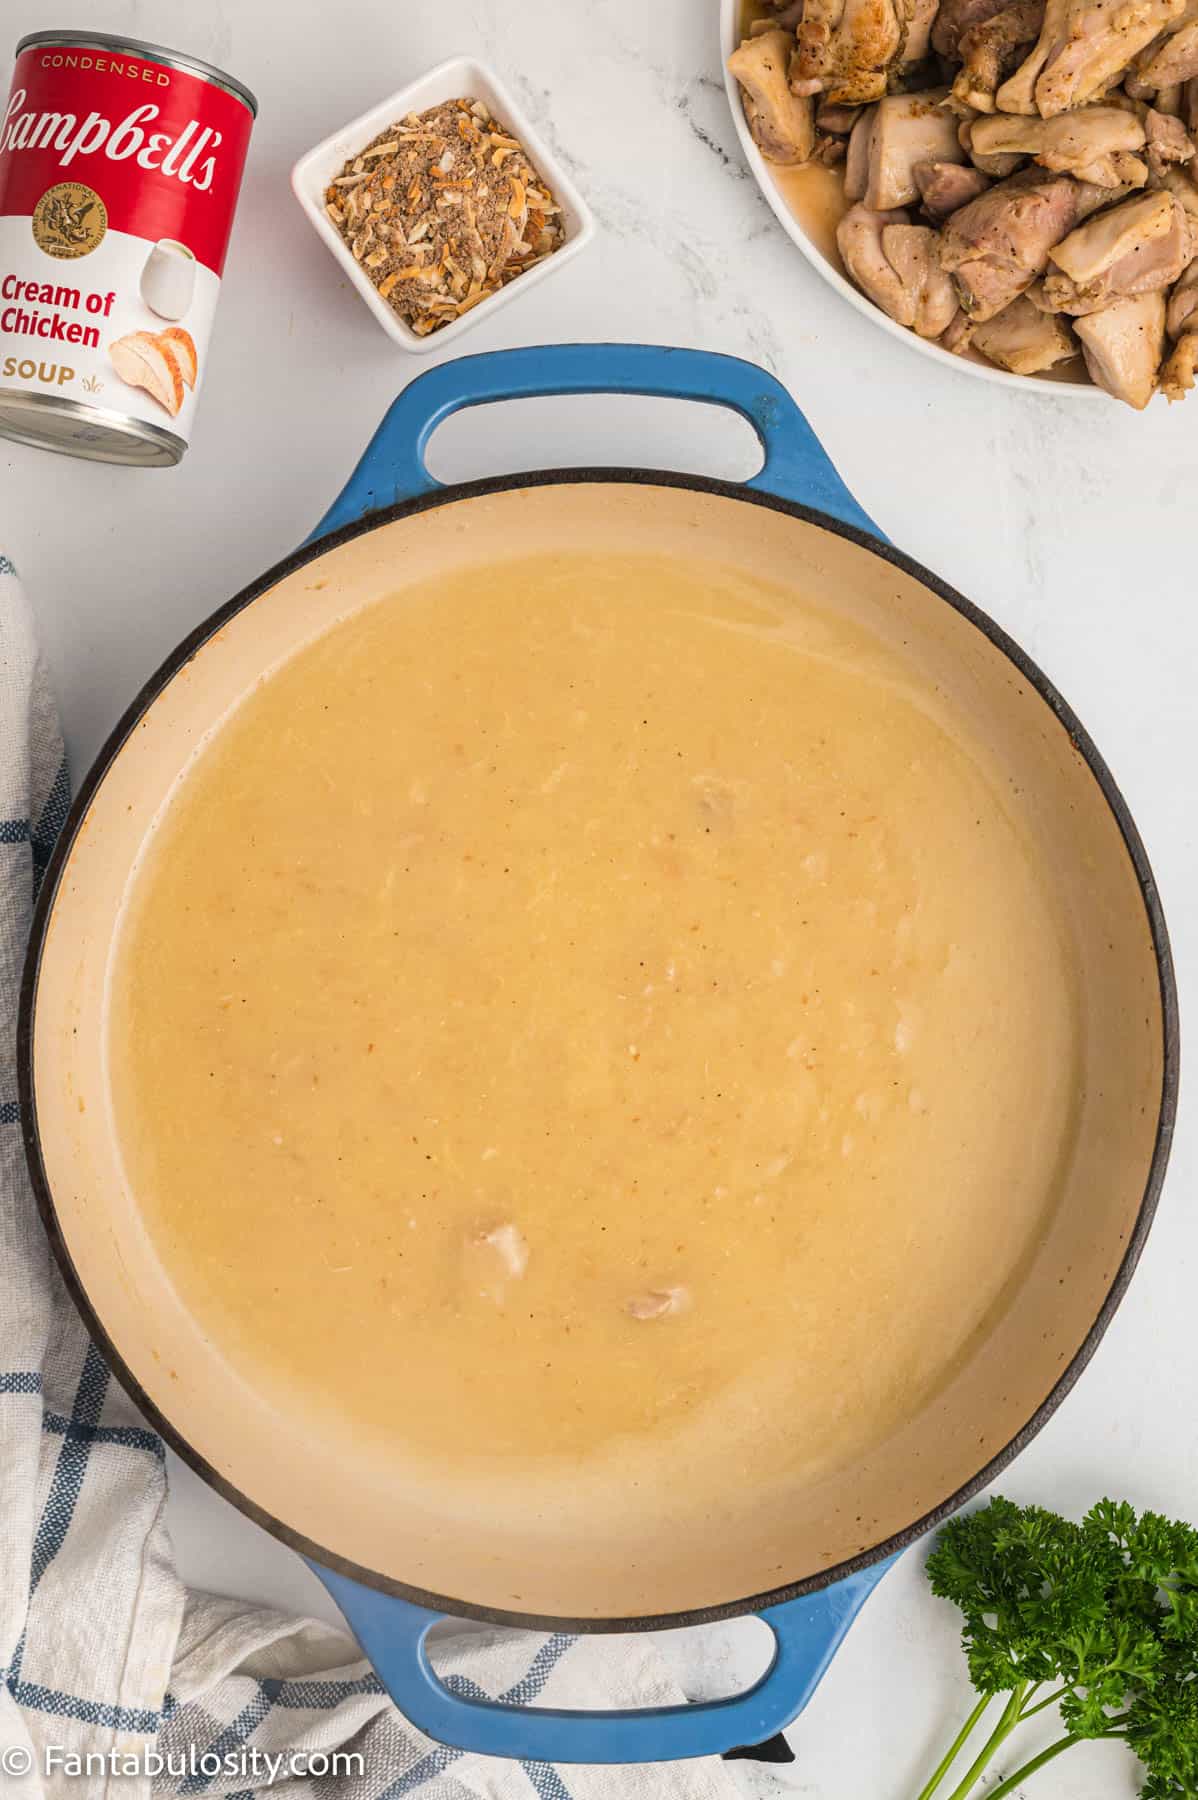 A creamy chicken gravy is shown in a large pan